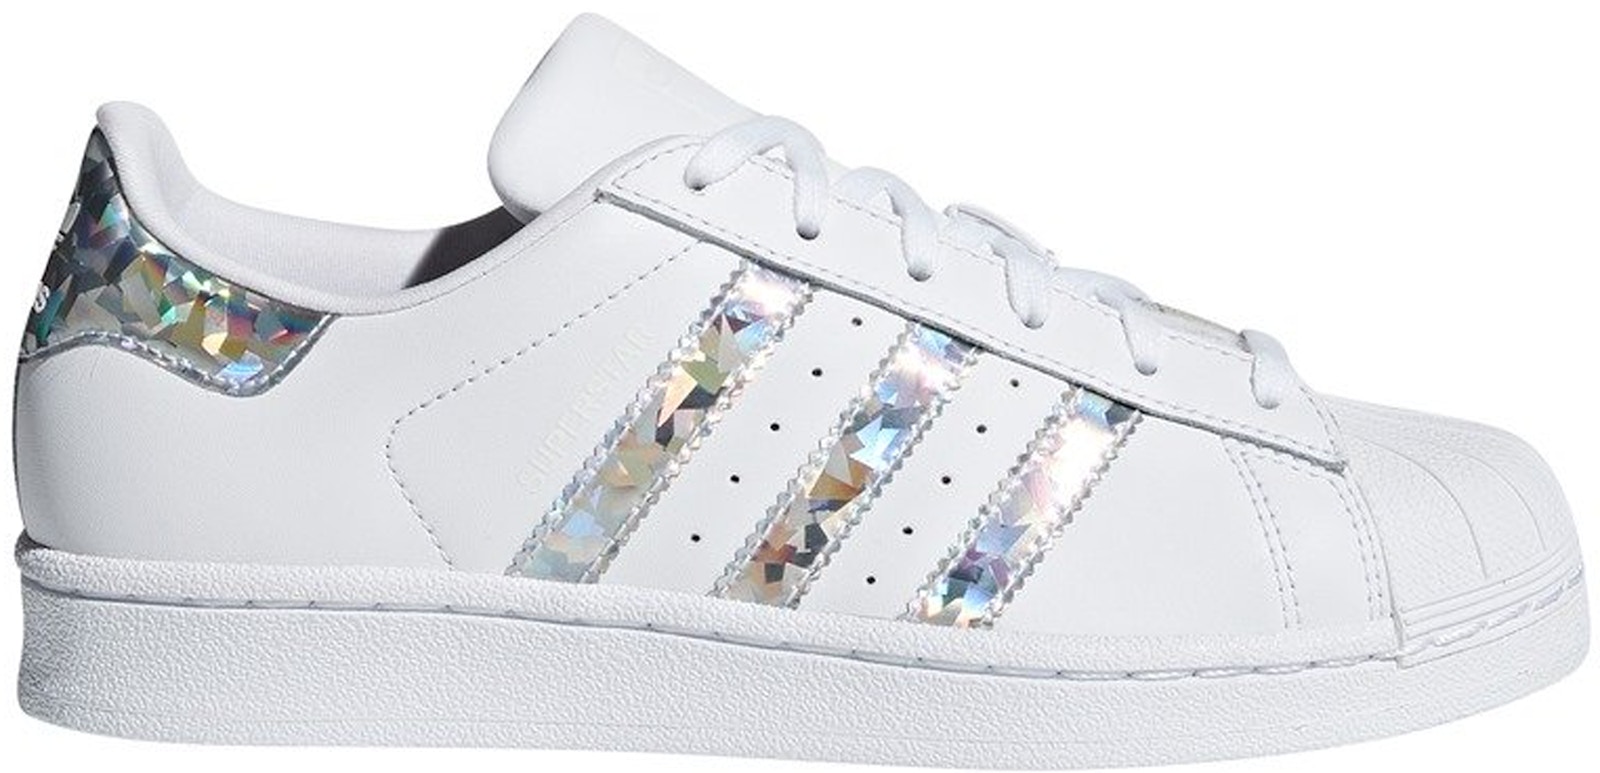 adidas Superstar White Holographic Stripes (Youth) - F33889